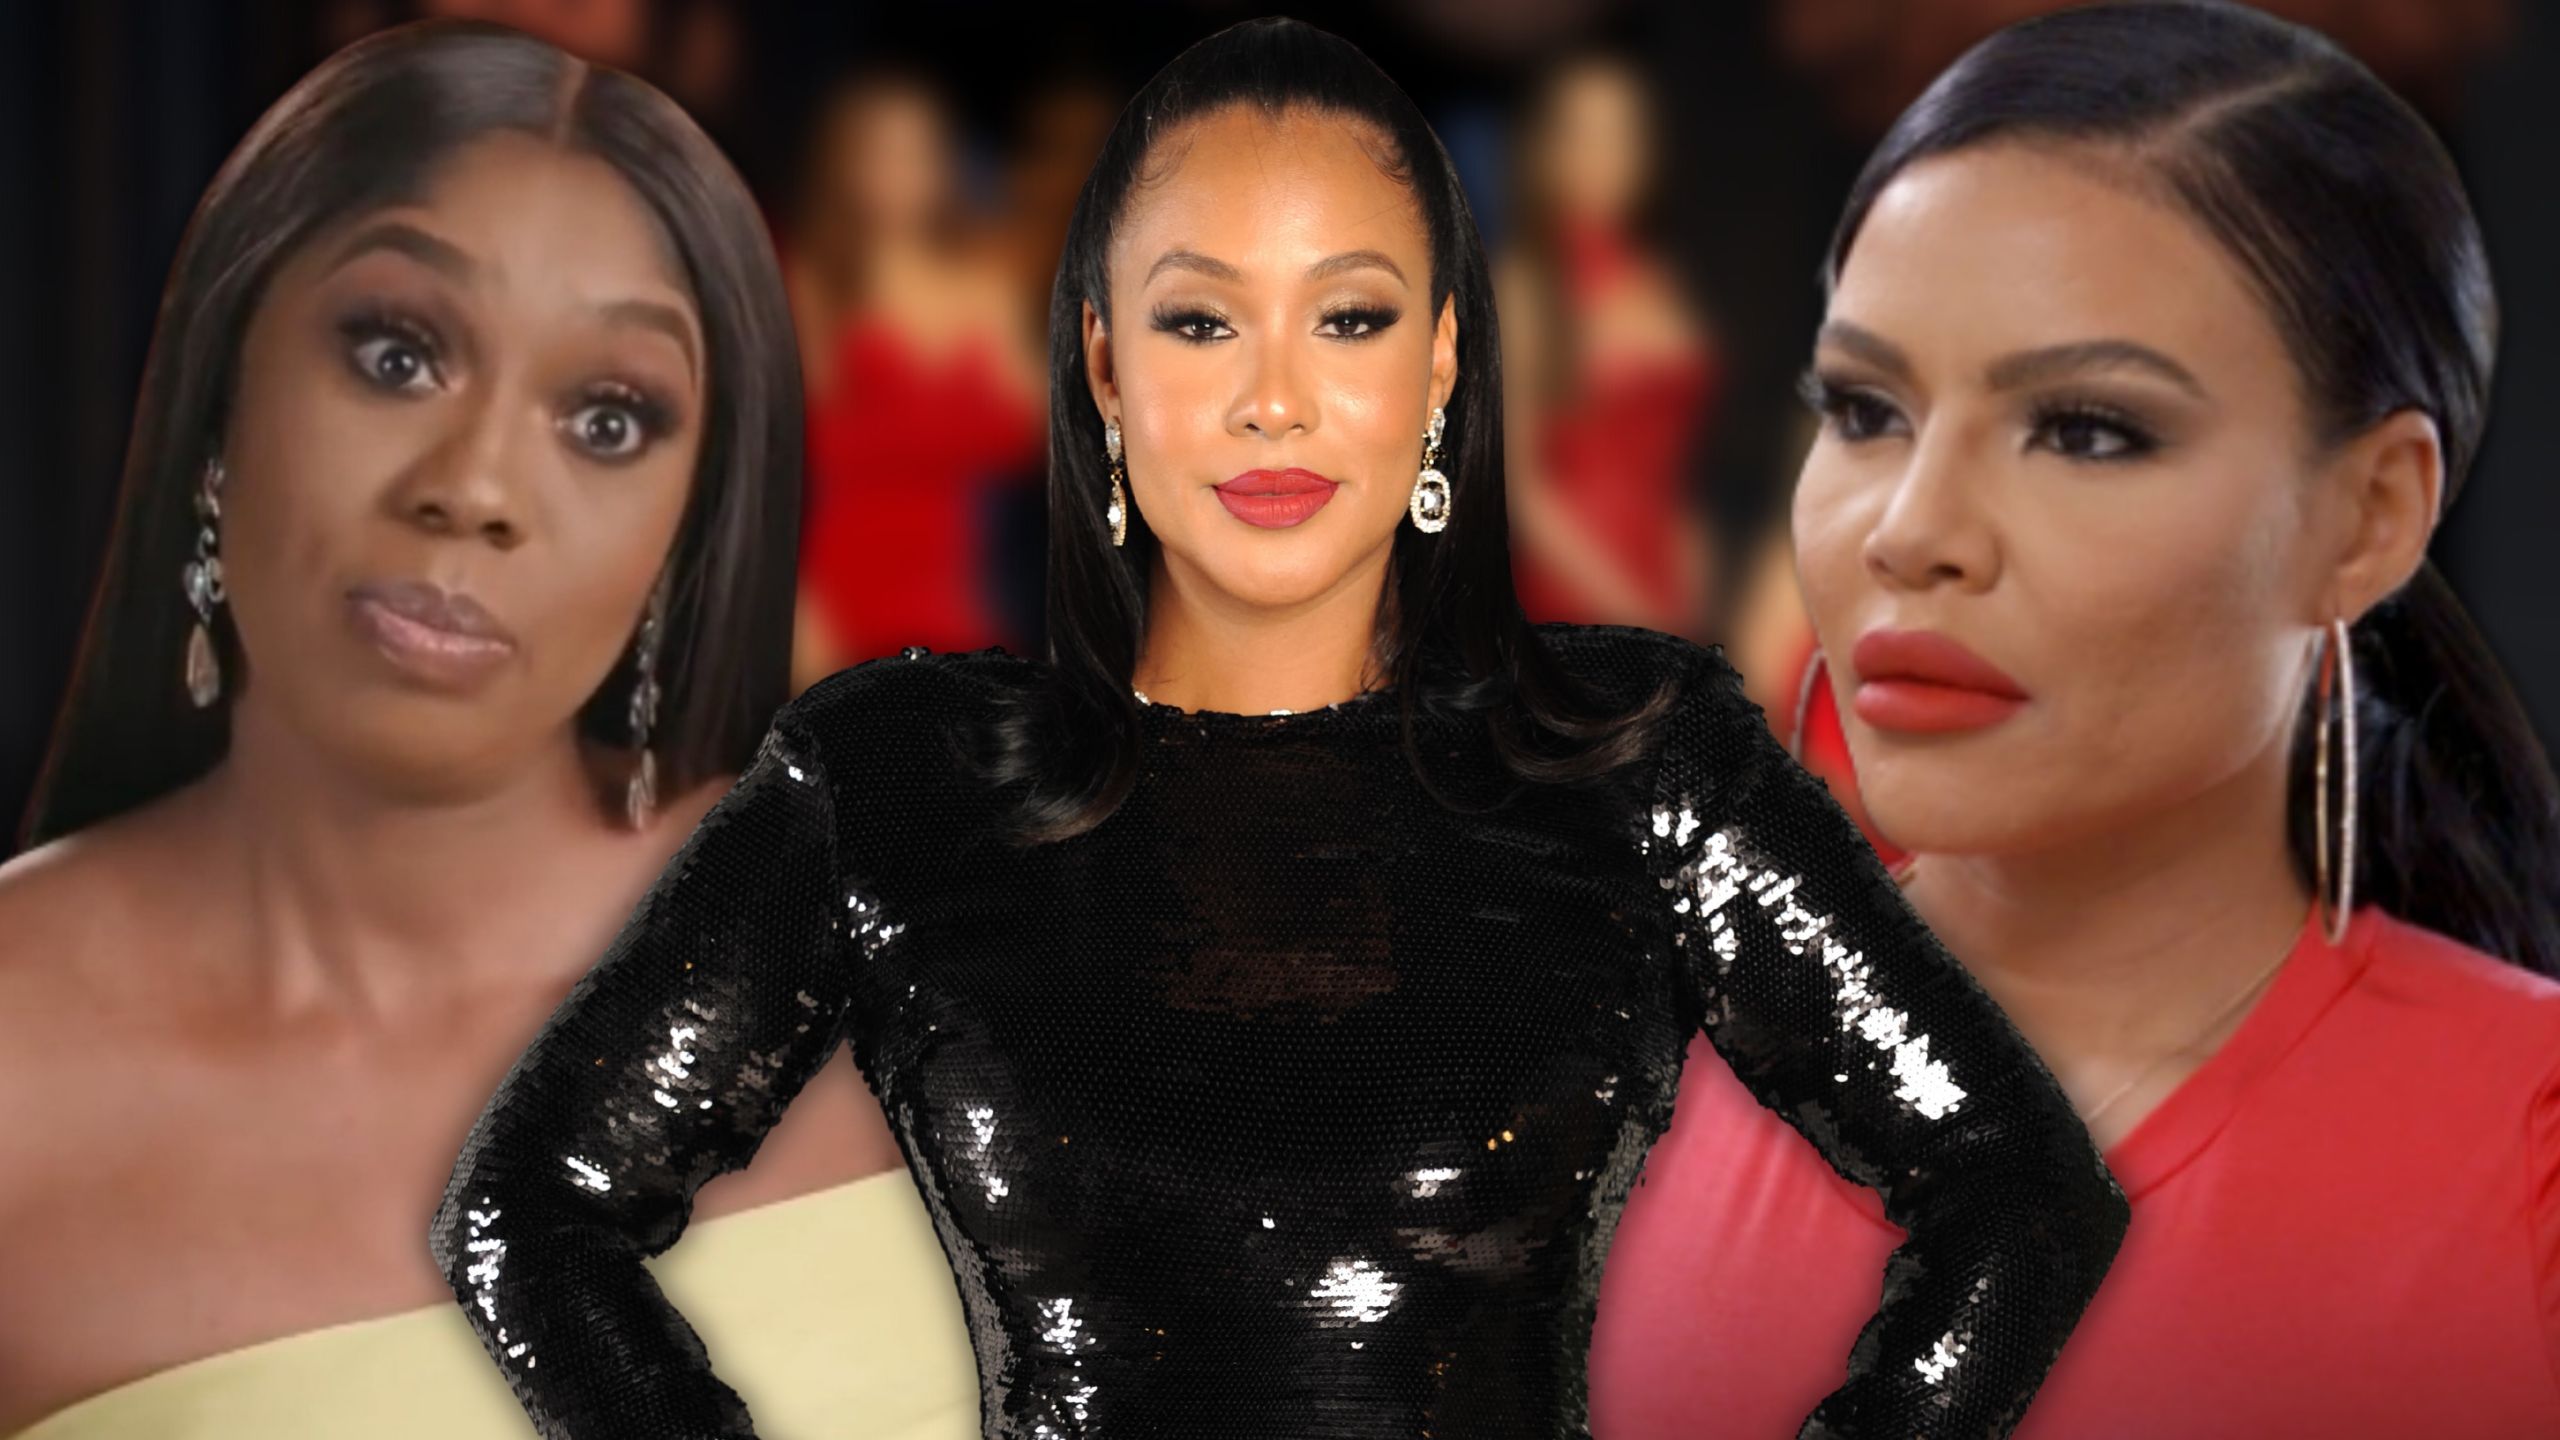 EXCLUSIVE: Jacqueline Blake Talks About Frenemy Mia Thornton and Some of the Ladies Enjoying Wendy Osefo Getting Doused